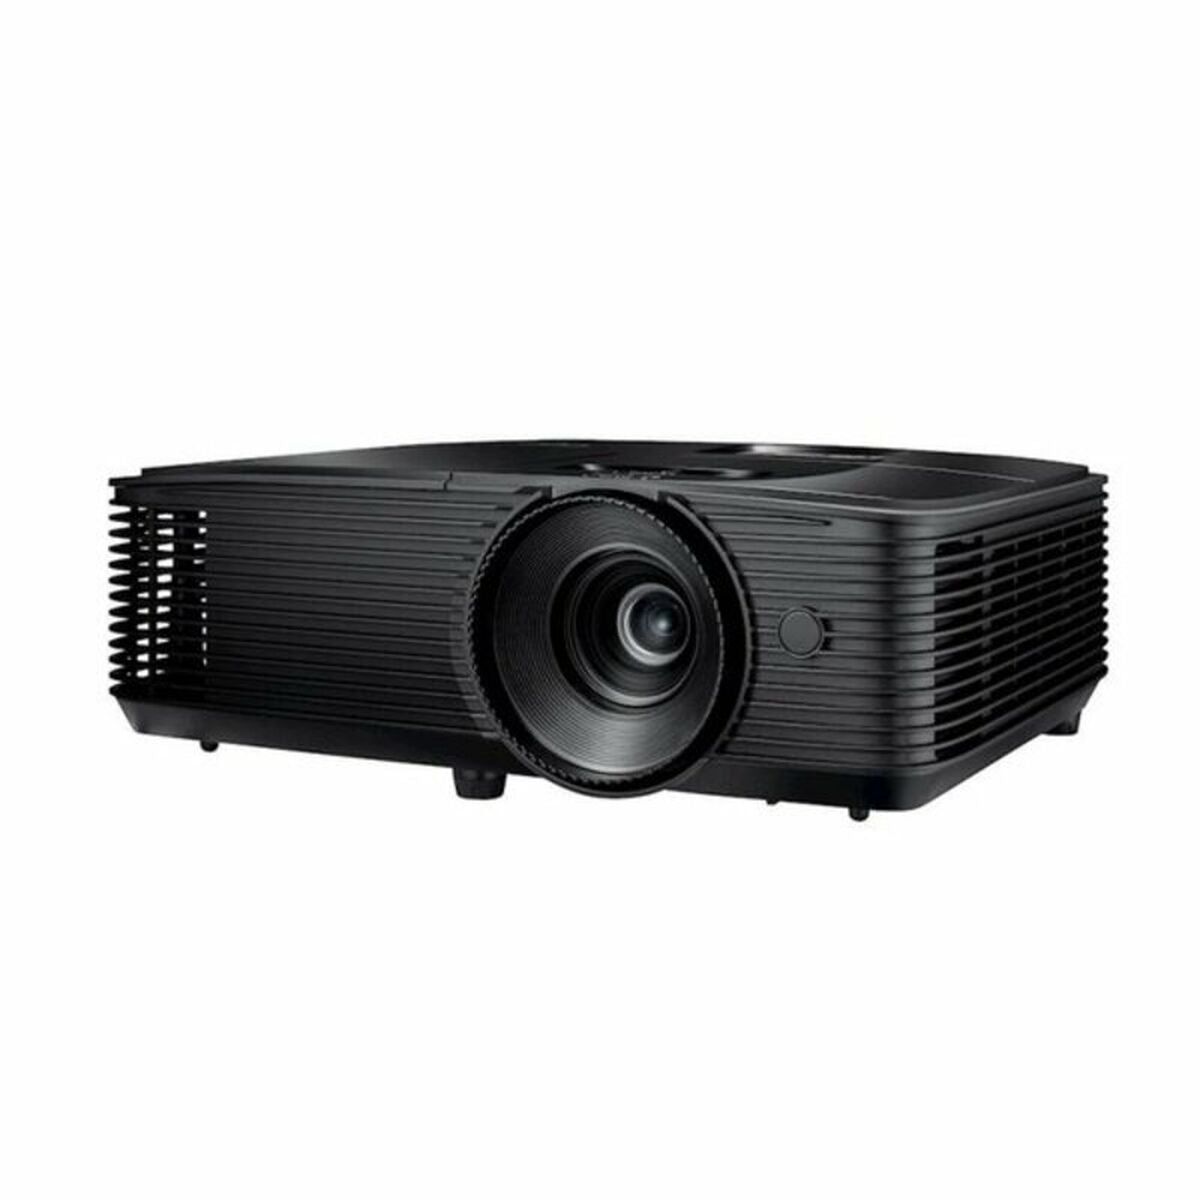 Projector Optoma E1P0A3PBE1Z4 Full HD 3600 lm 1920 x 1080 px, Optoma, Electronics, TV, Video and home cinema, projector-optoma-e1p0a3pbe1z4-full-hd-3600-lm-1920-x-1080-px, Brand_Optoma, category-reference-2609, category-reference-2642, category-reference-2947, category-reference-t-18805, category-reference-t-18811, category-reference-t-19653, cinema and television, computers / peripherals, Condition_NEW, entertainment, office, Price_500 - 600, RiotNook